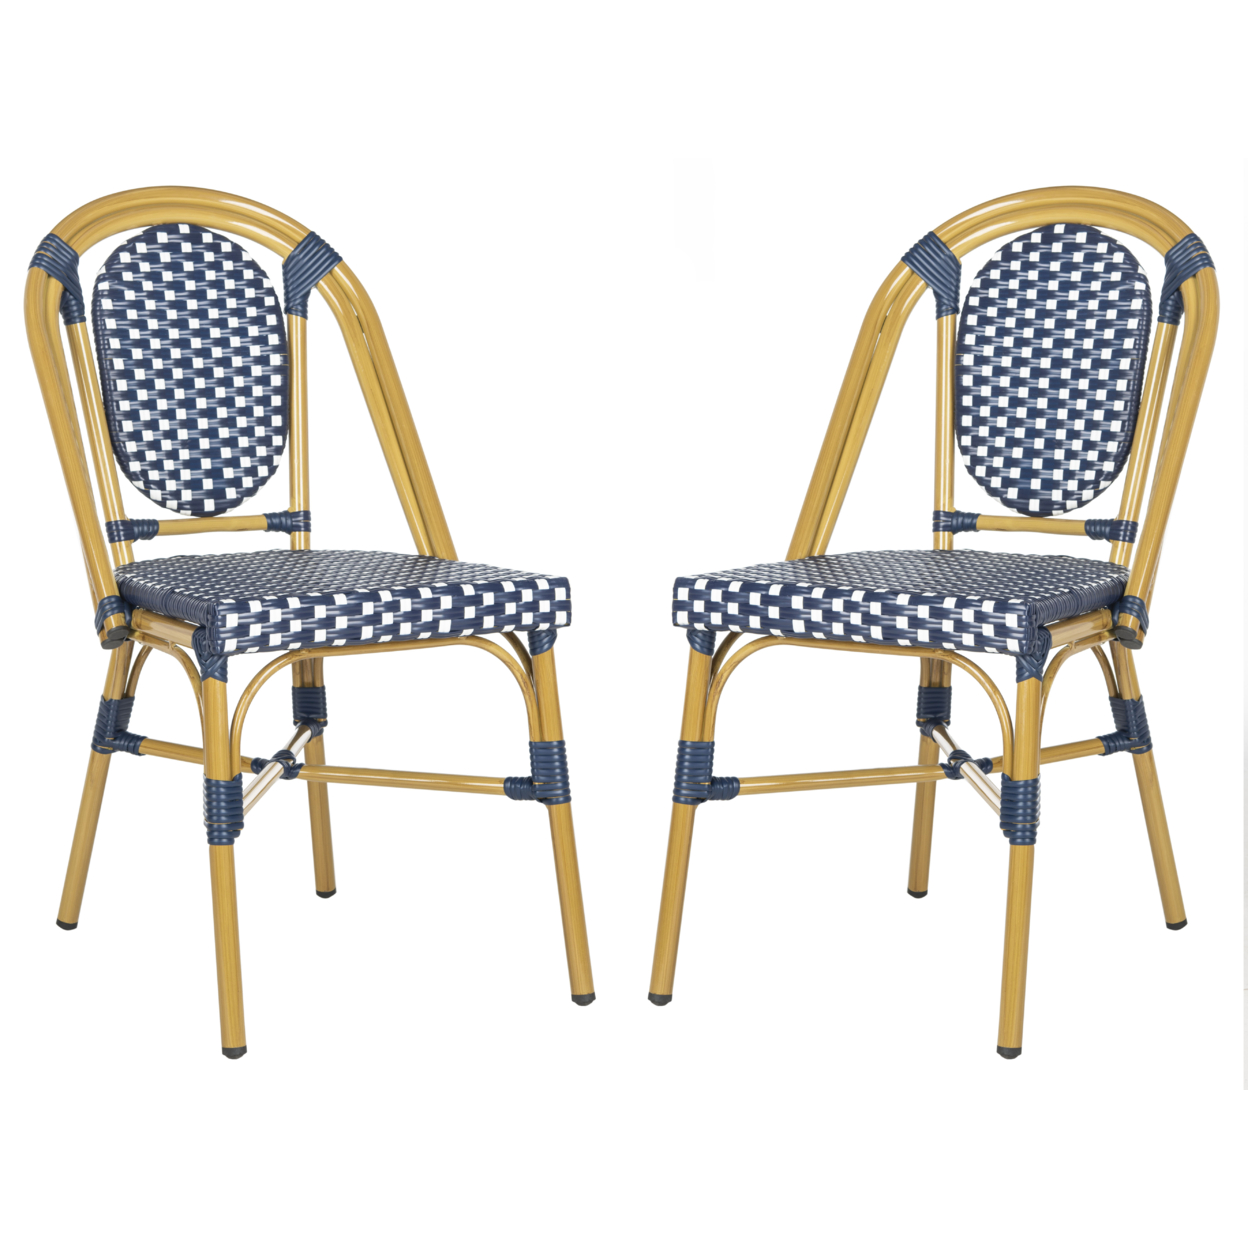 SAFAVIEH Lenda Outdoor Patio French Bistro Stackable Chair, Navy/White/Brown, Set of 2 - image 3 of 7